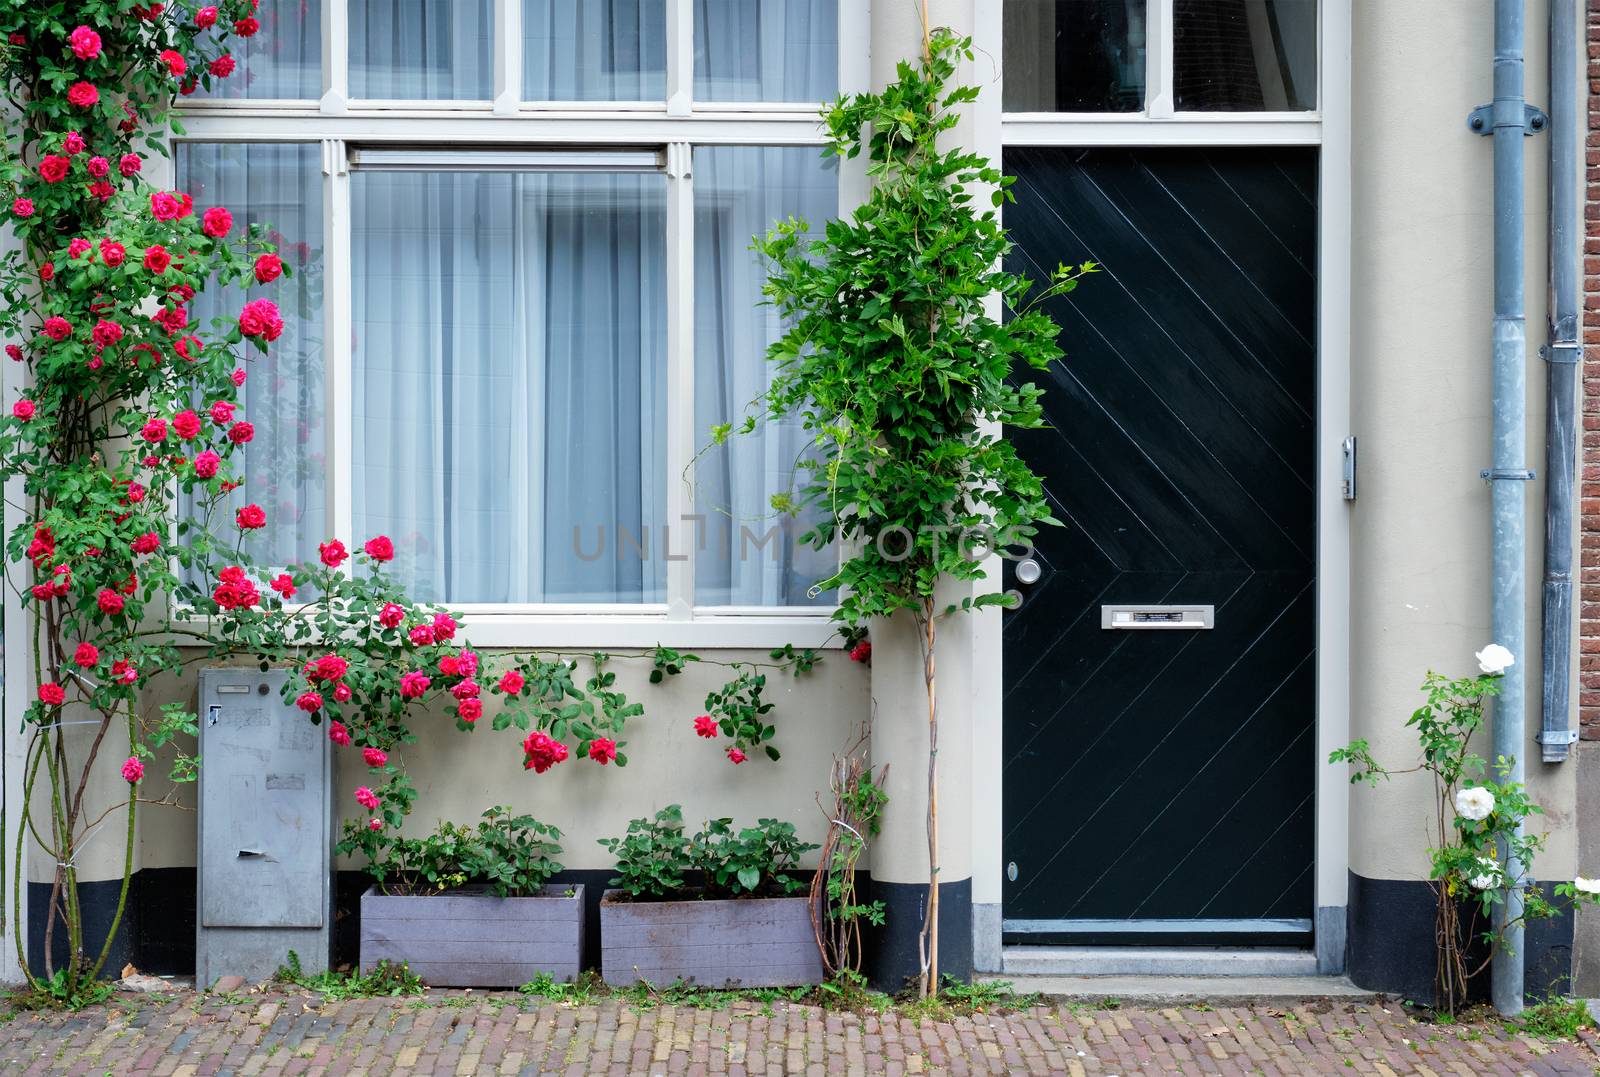 Door and window of an old house in Netherlands by dimol